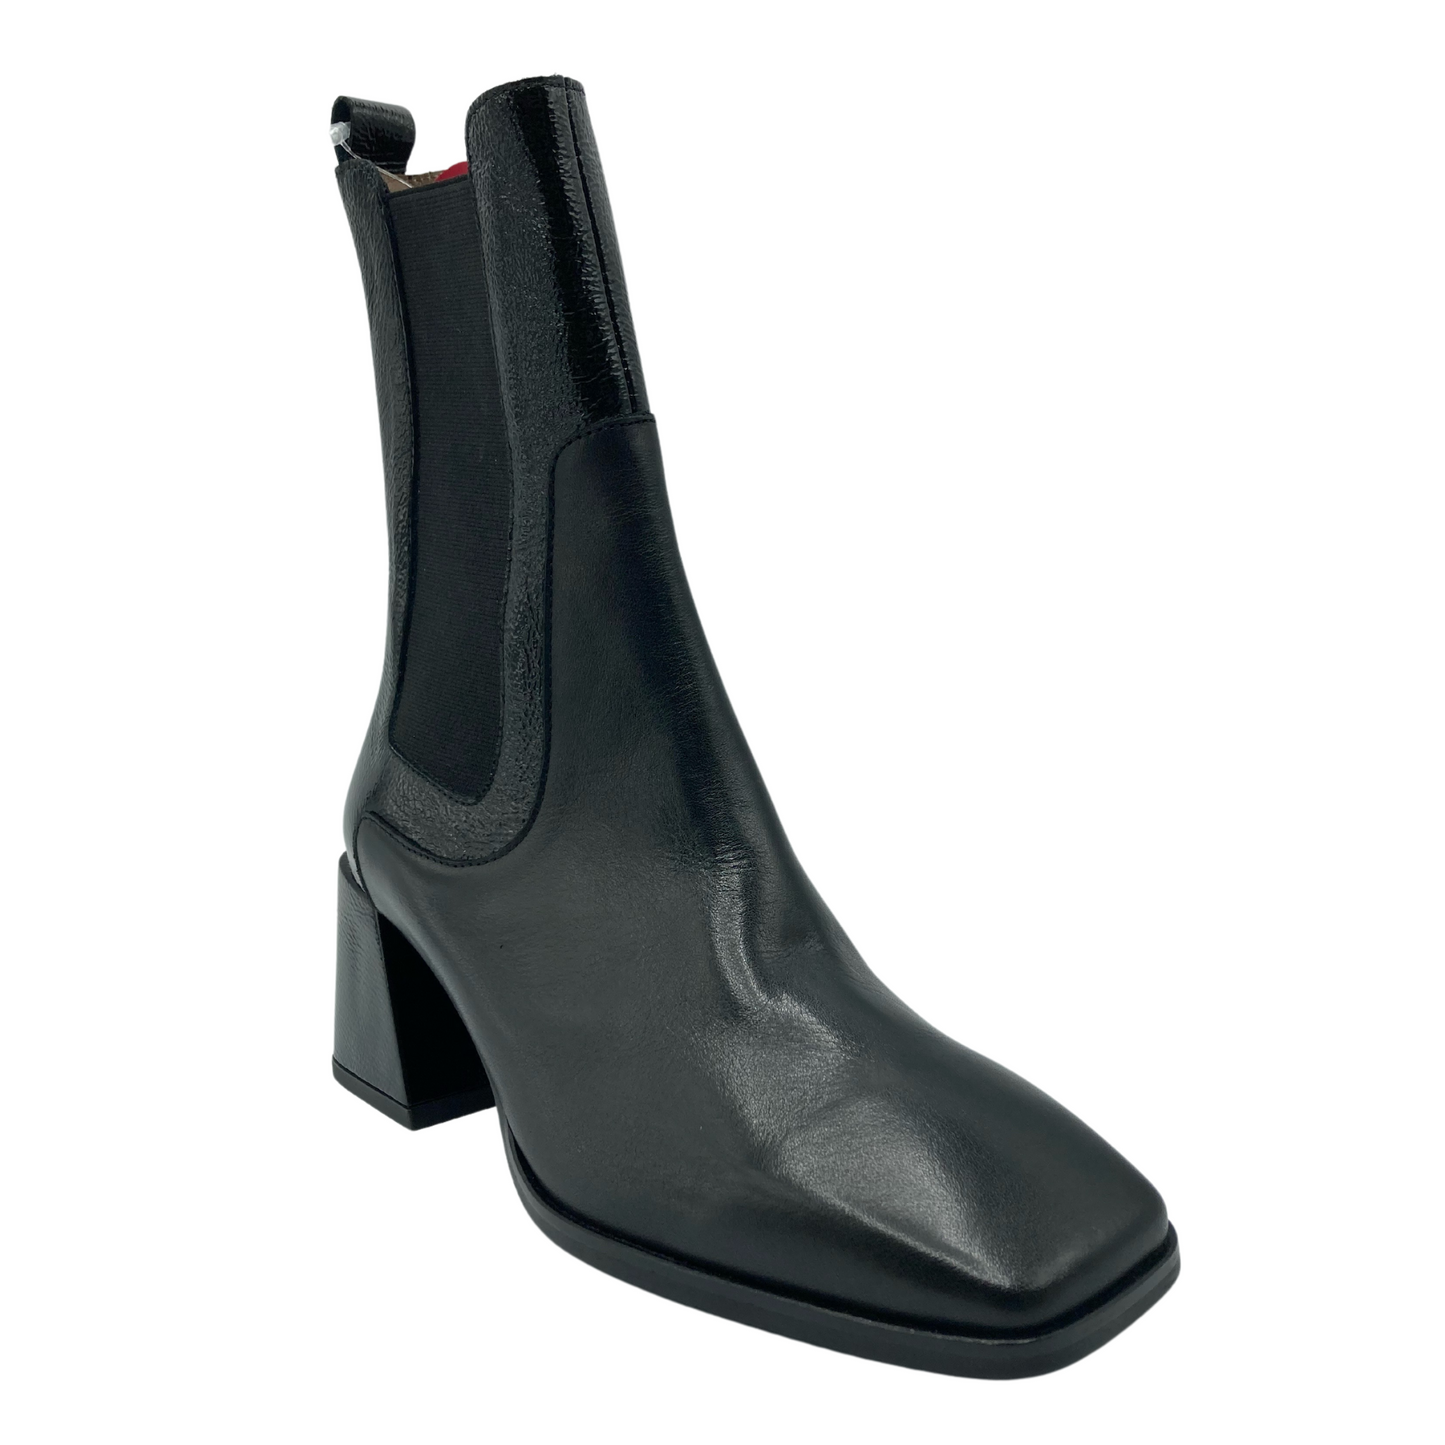 45 degree angled view of black leather short boot with chunky flared heel and elastic side gore